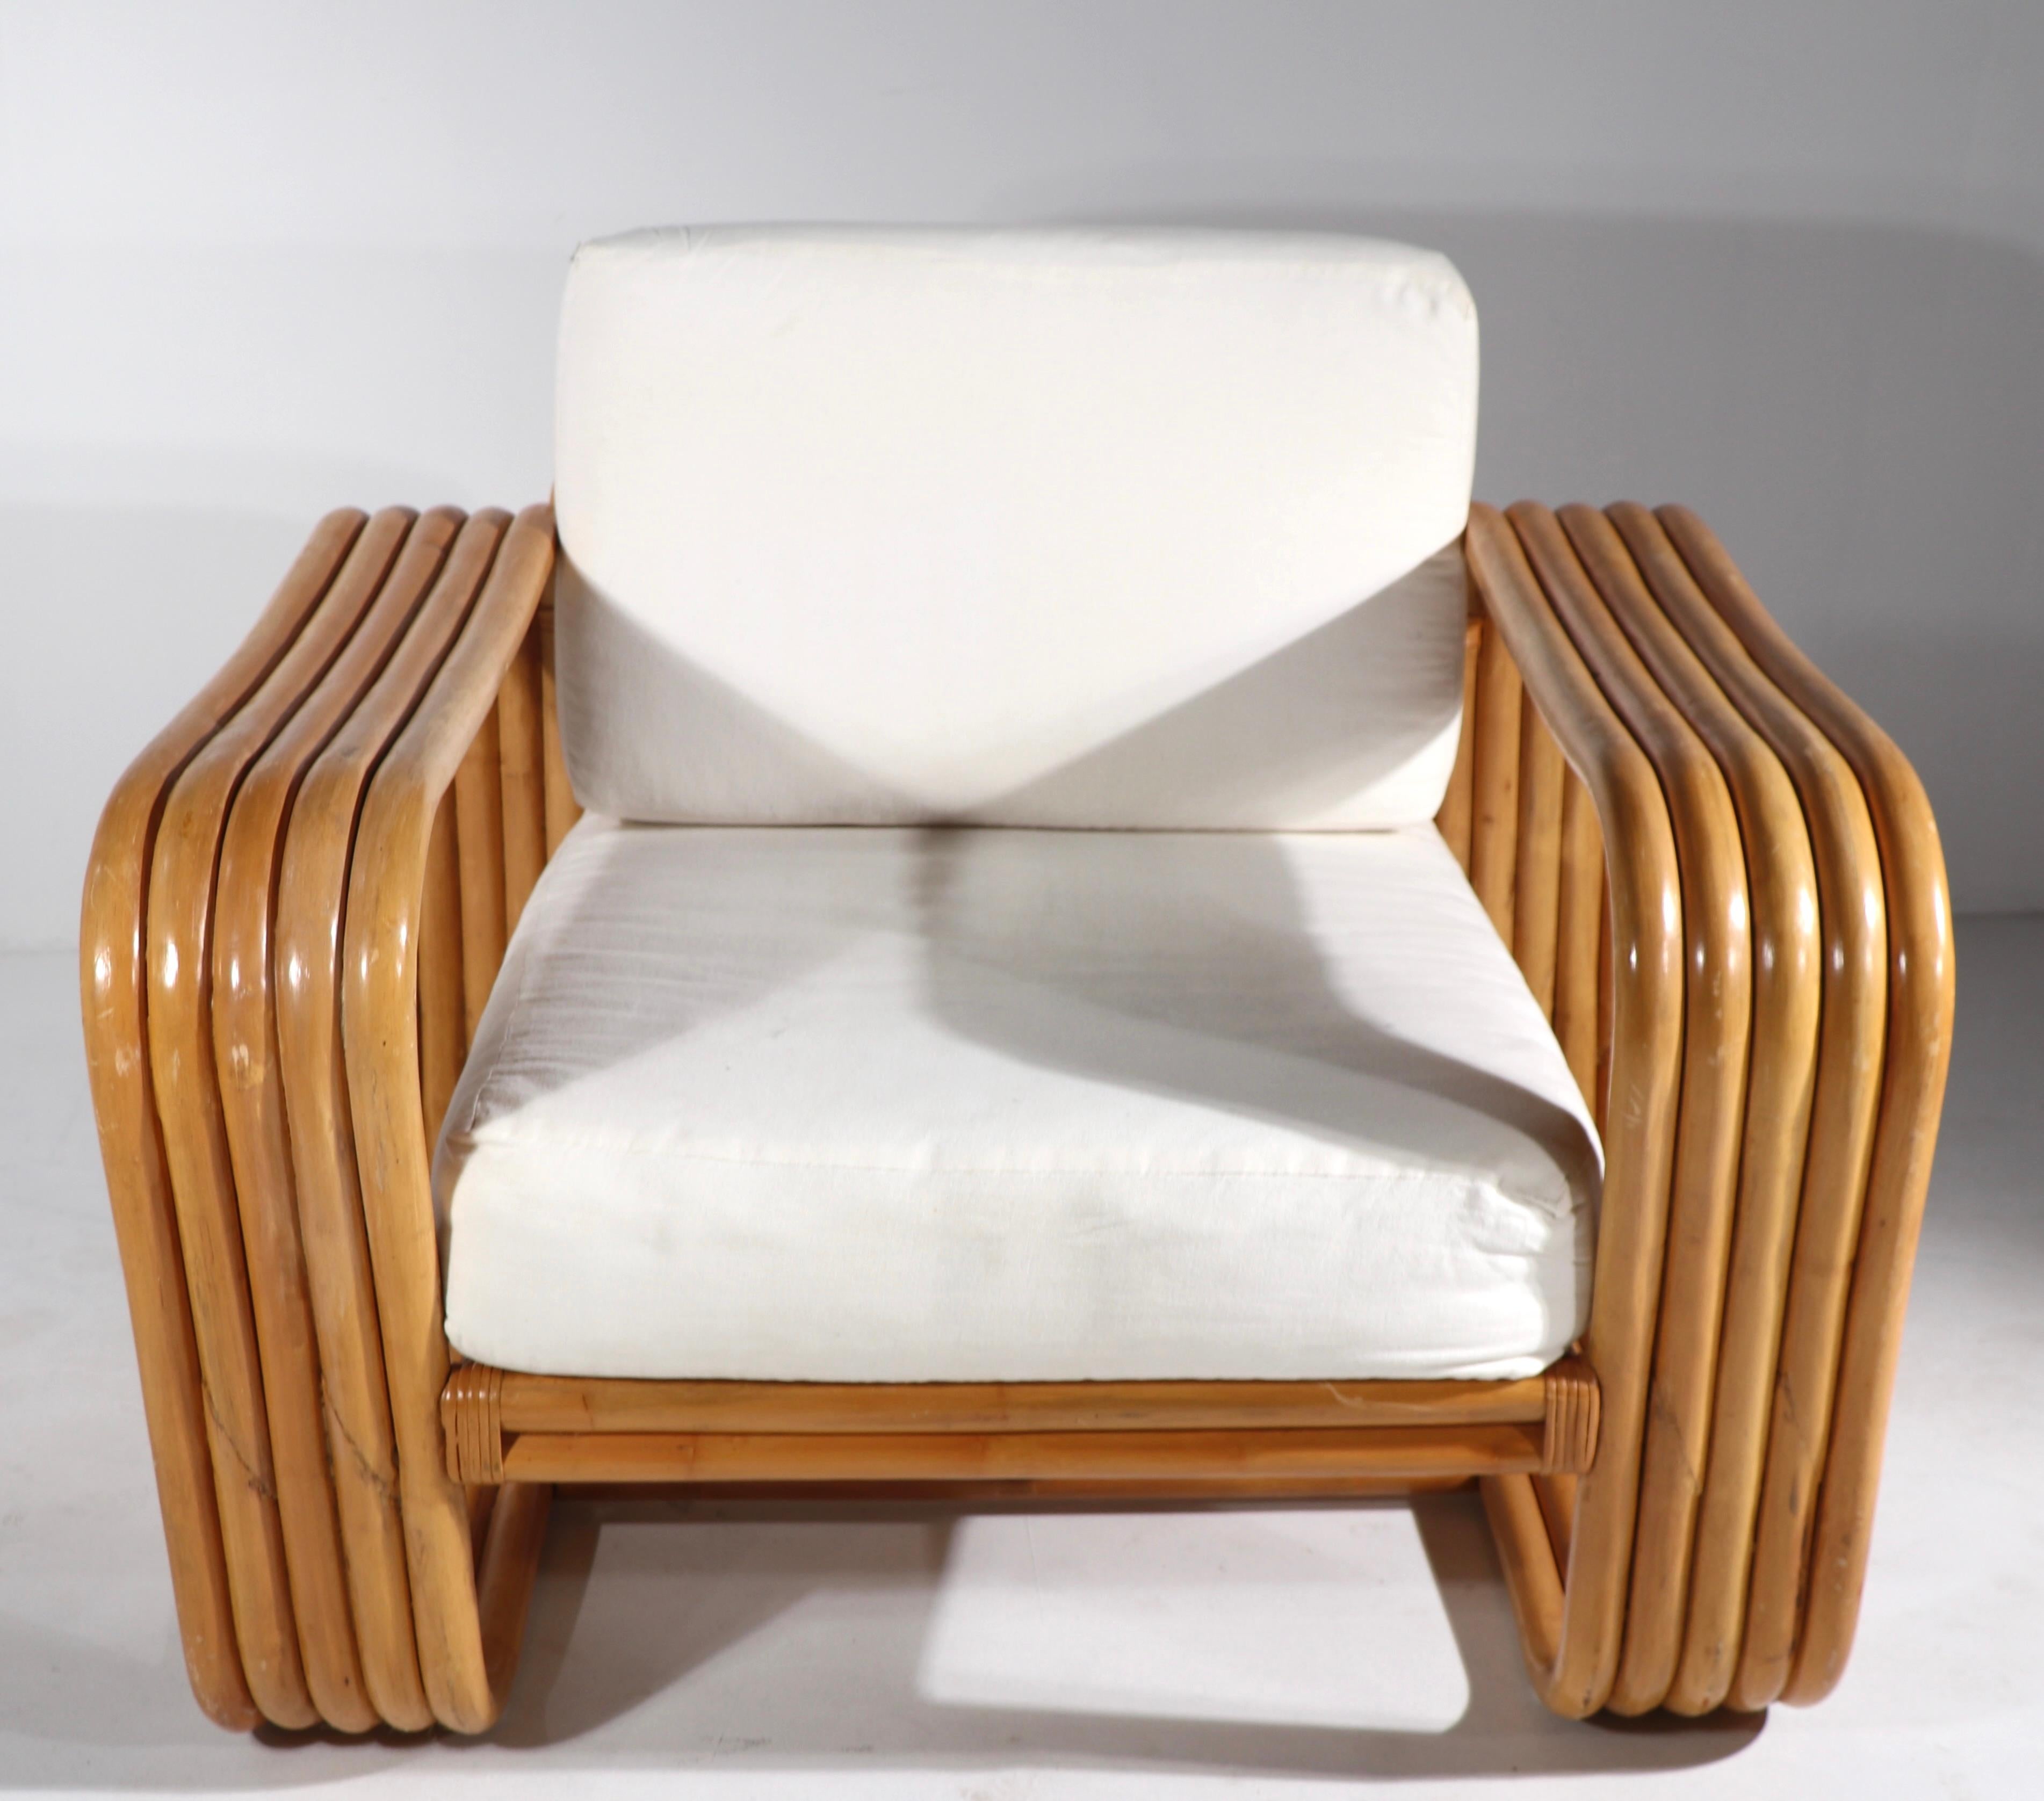 20th Century Bamboo Chair after Frankl